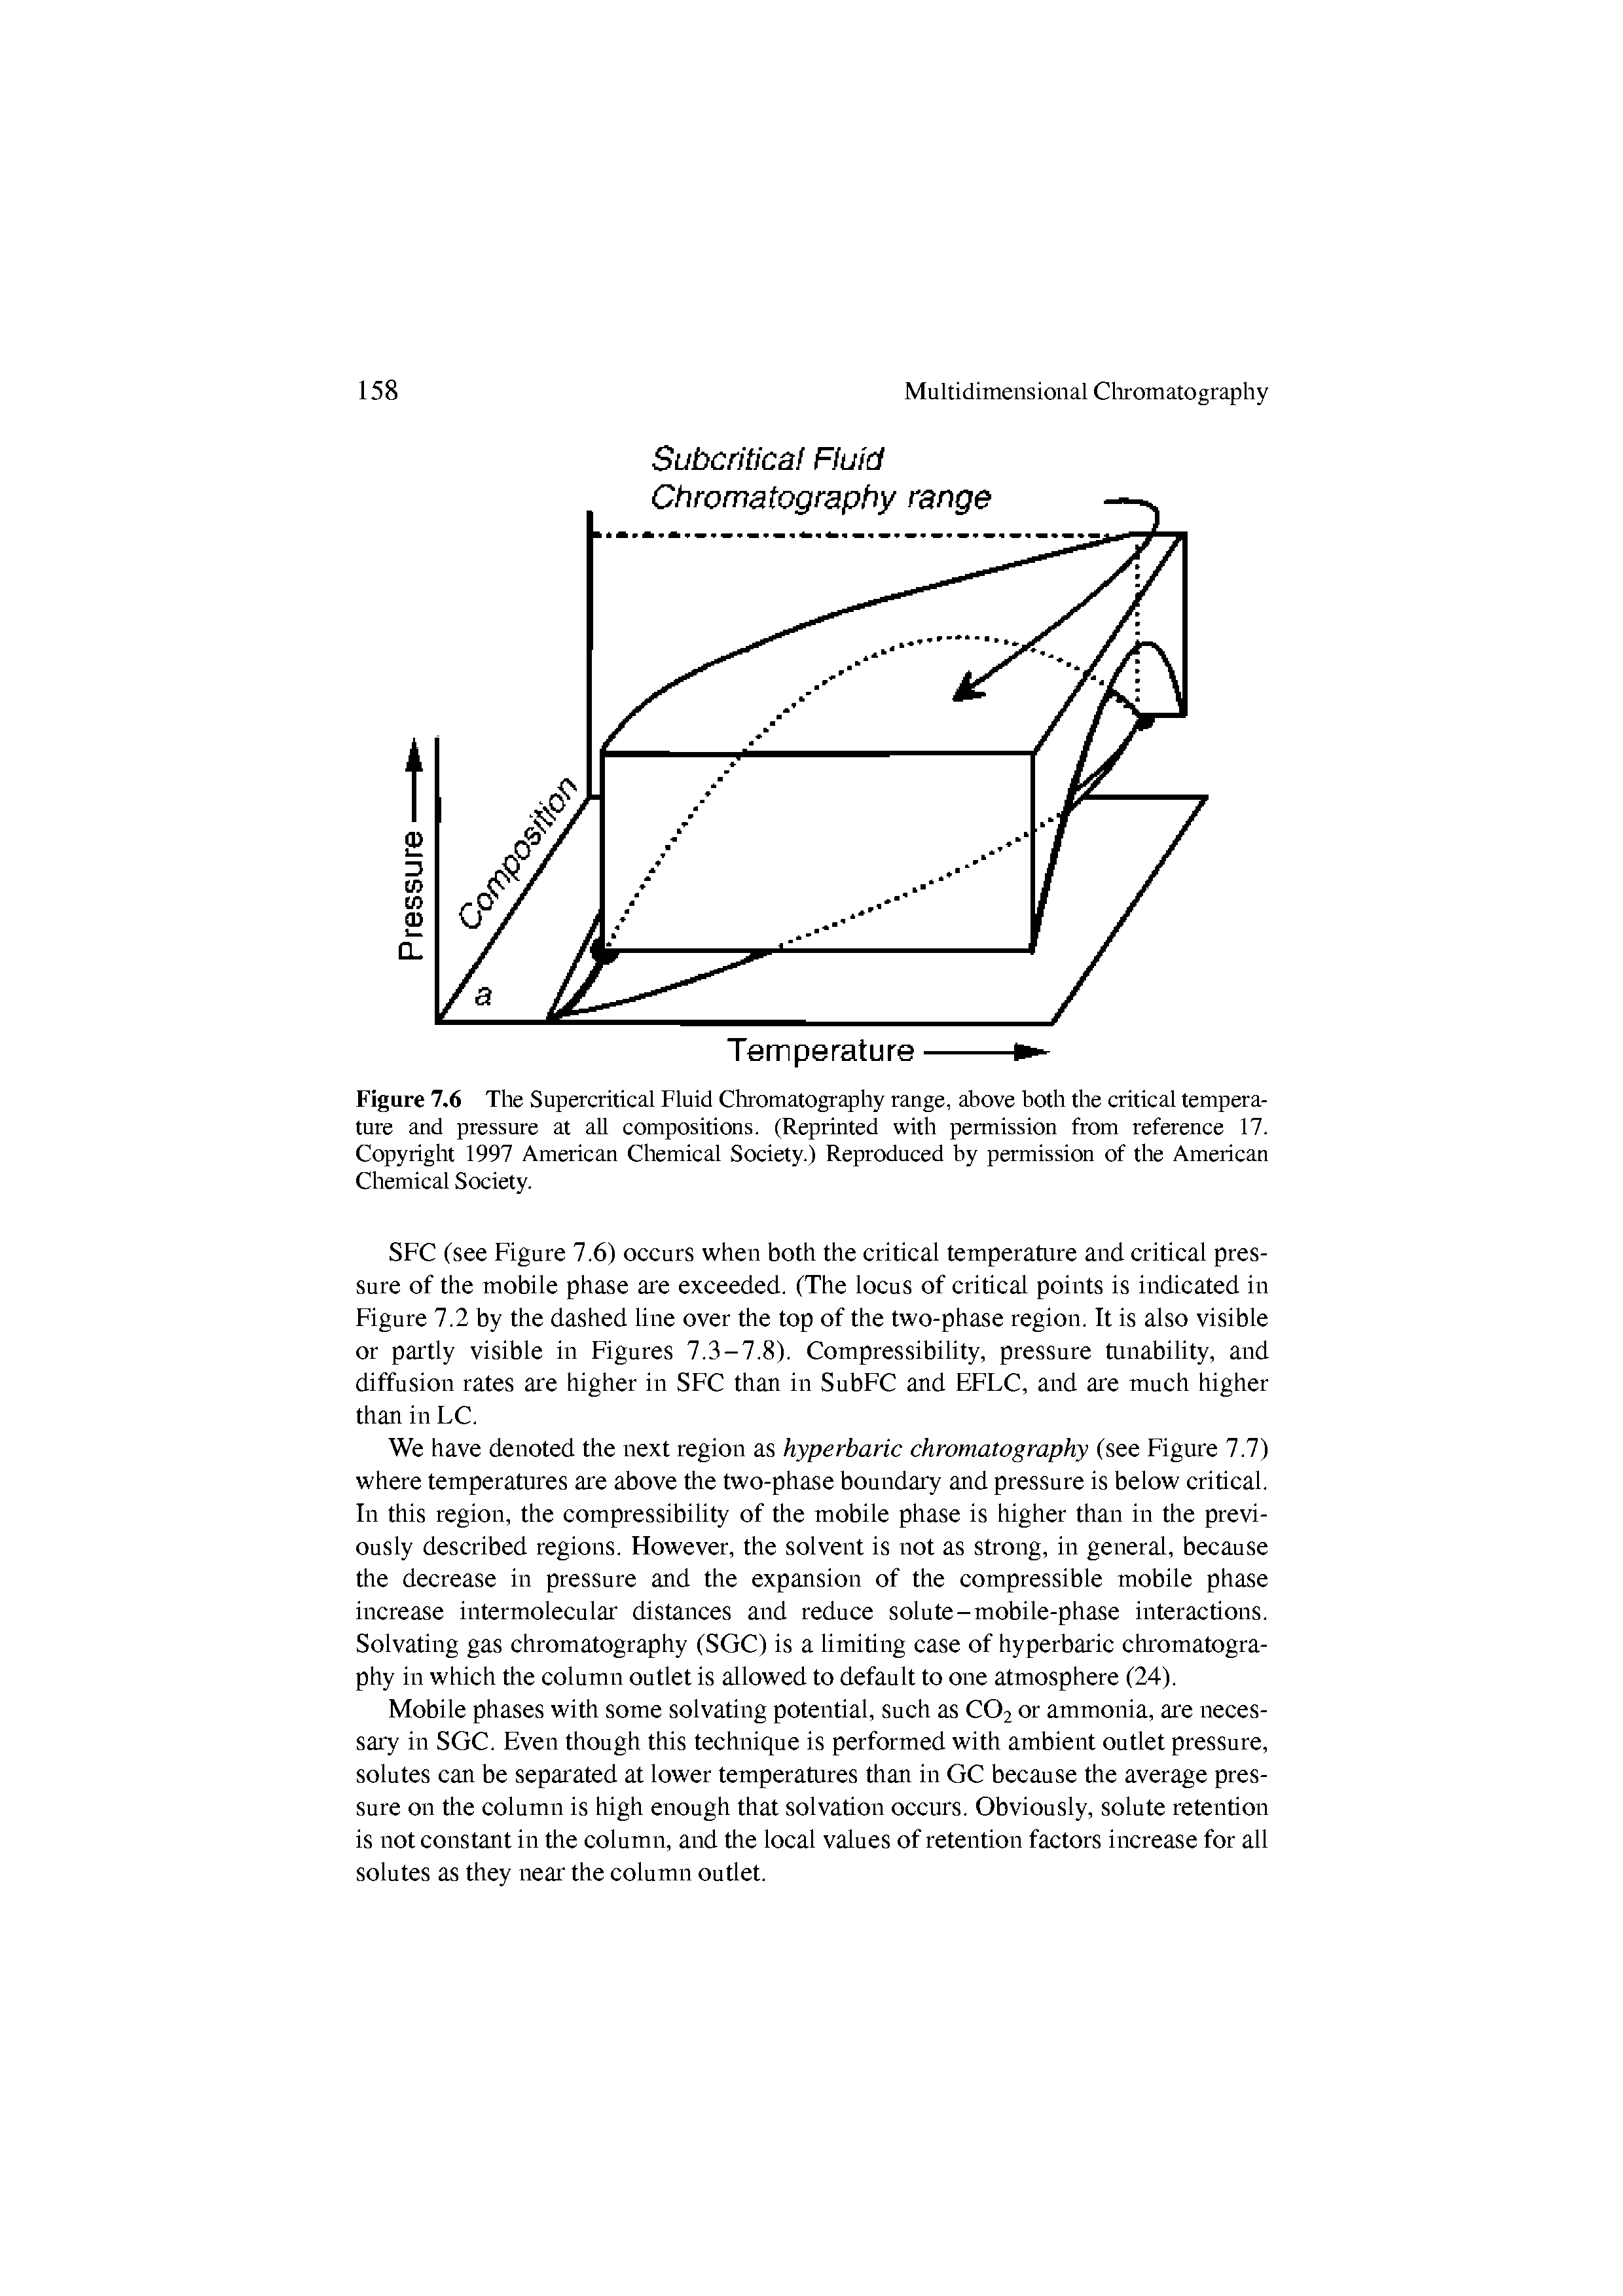 Figure 7.6 The Supercritical Fluid Clnomatography range, above both the critical temperature and pressure at aU compositions. (Reprinted with peimission from reference 17. Copyright 1997 American Chemical Society.) Reproduced by permission of the American Chemical Society.